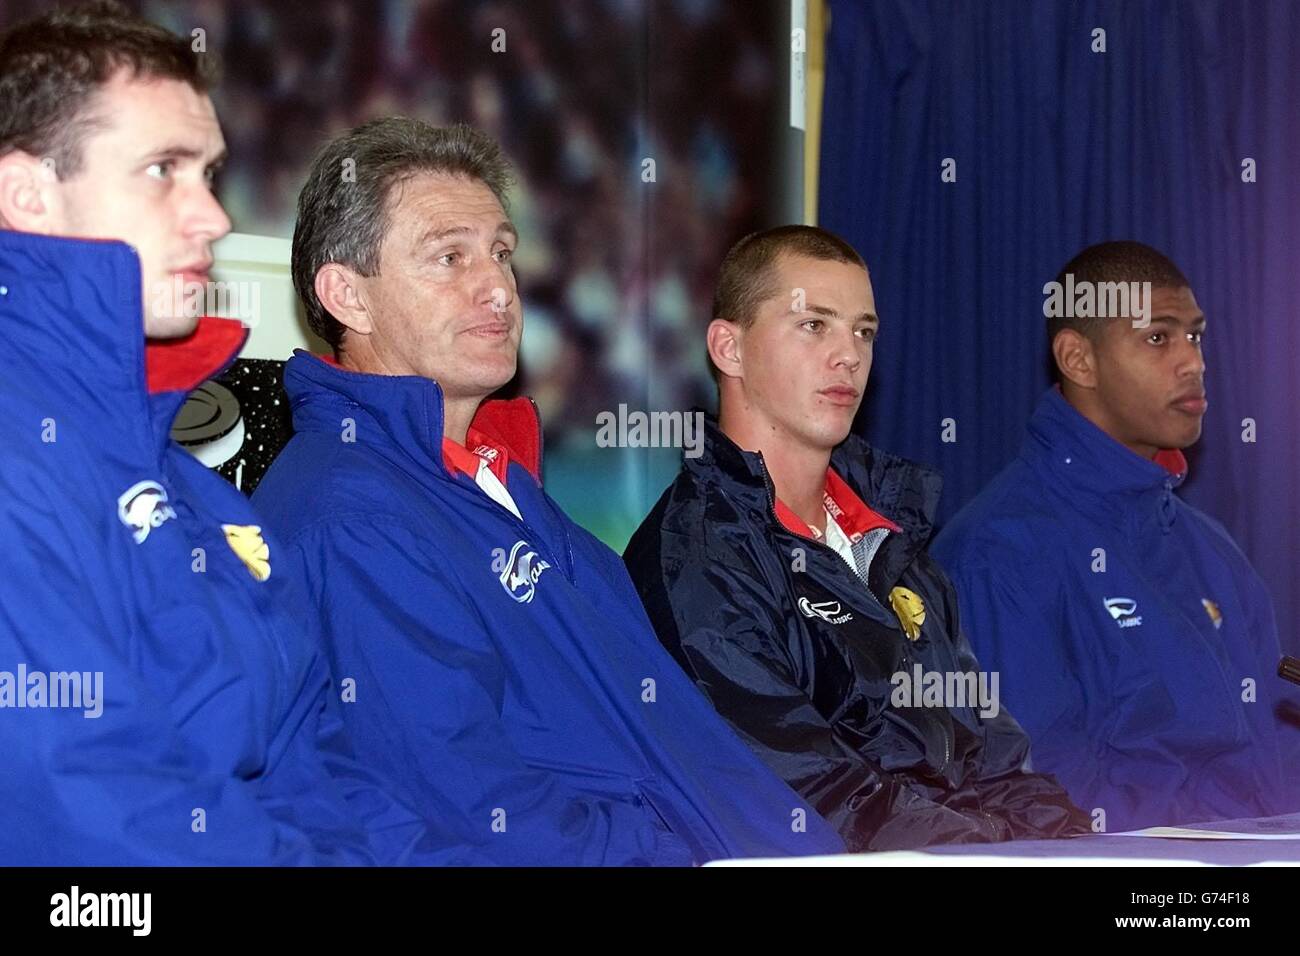 Great Britain Rugby-Trainer Stockfoto